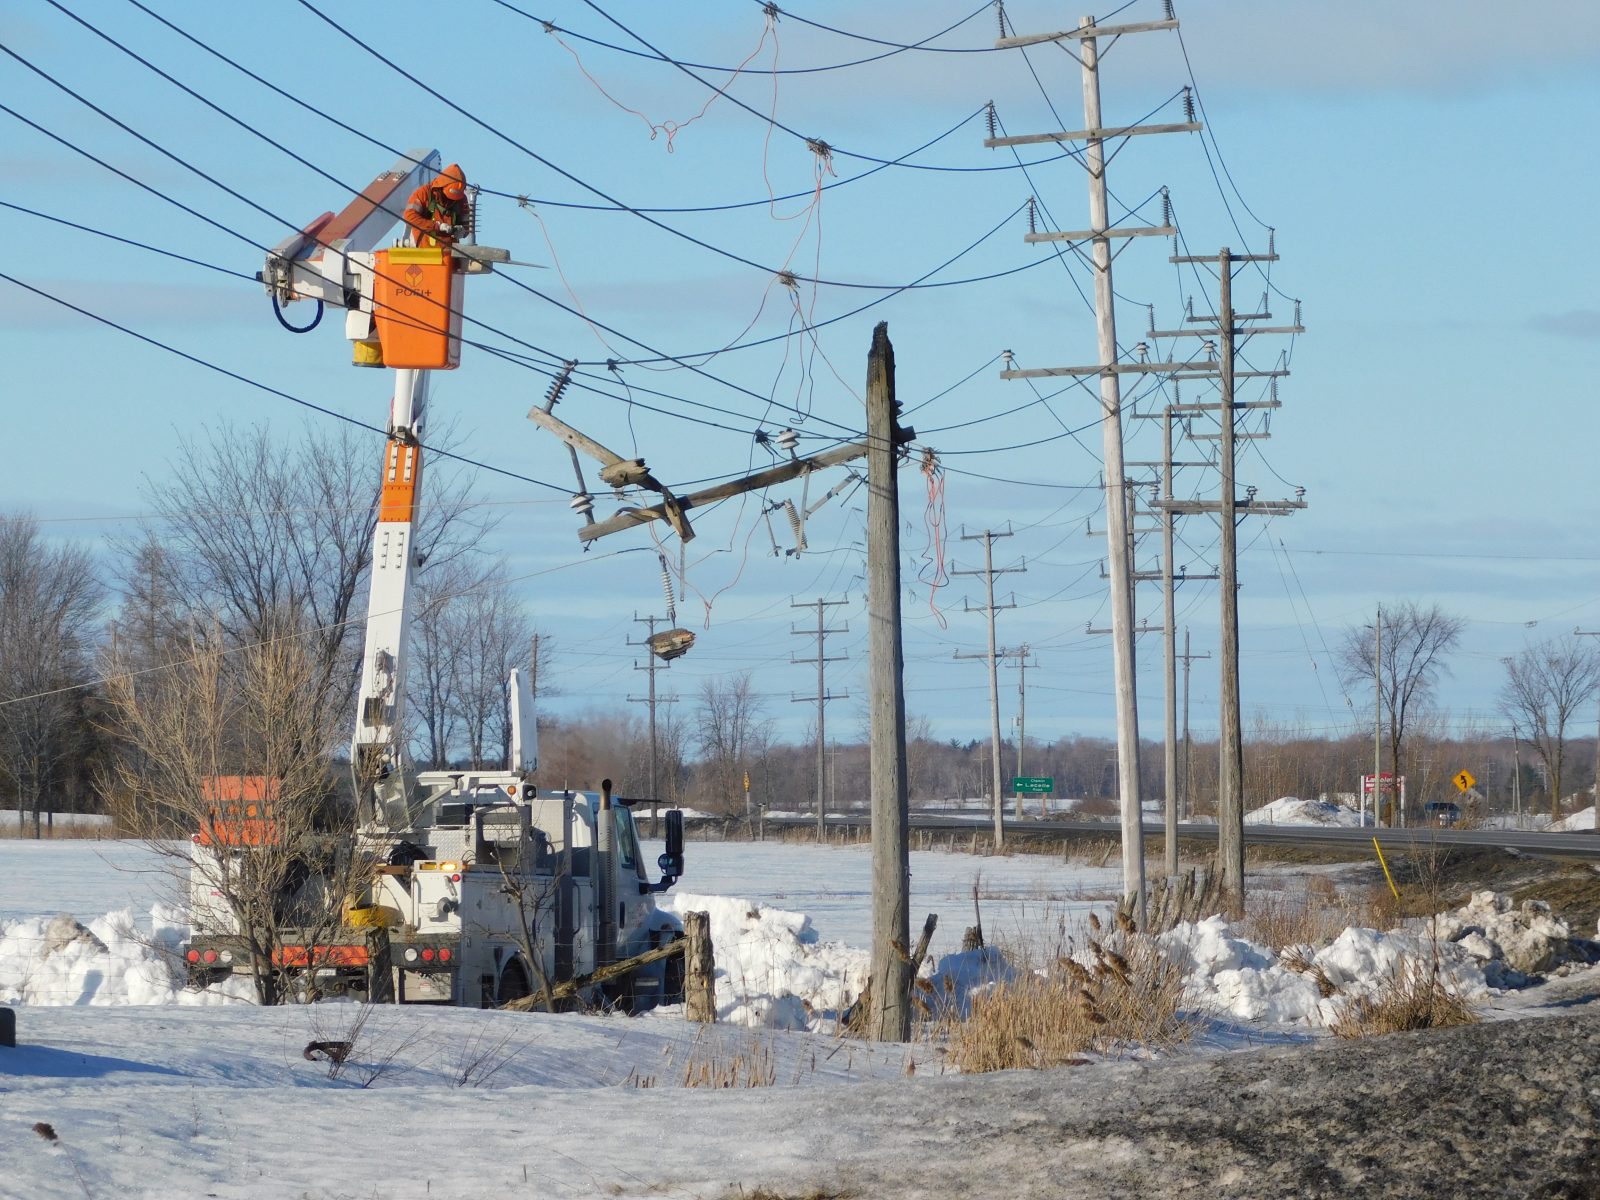 Hydro workers deal with power outage